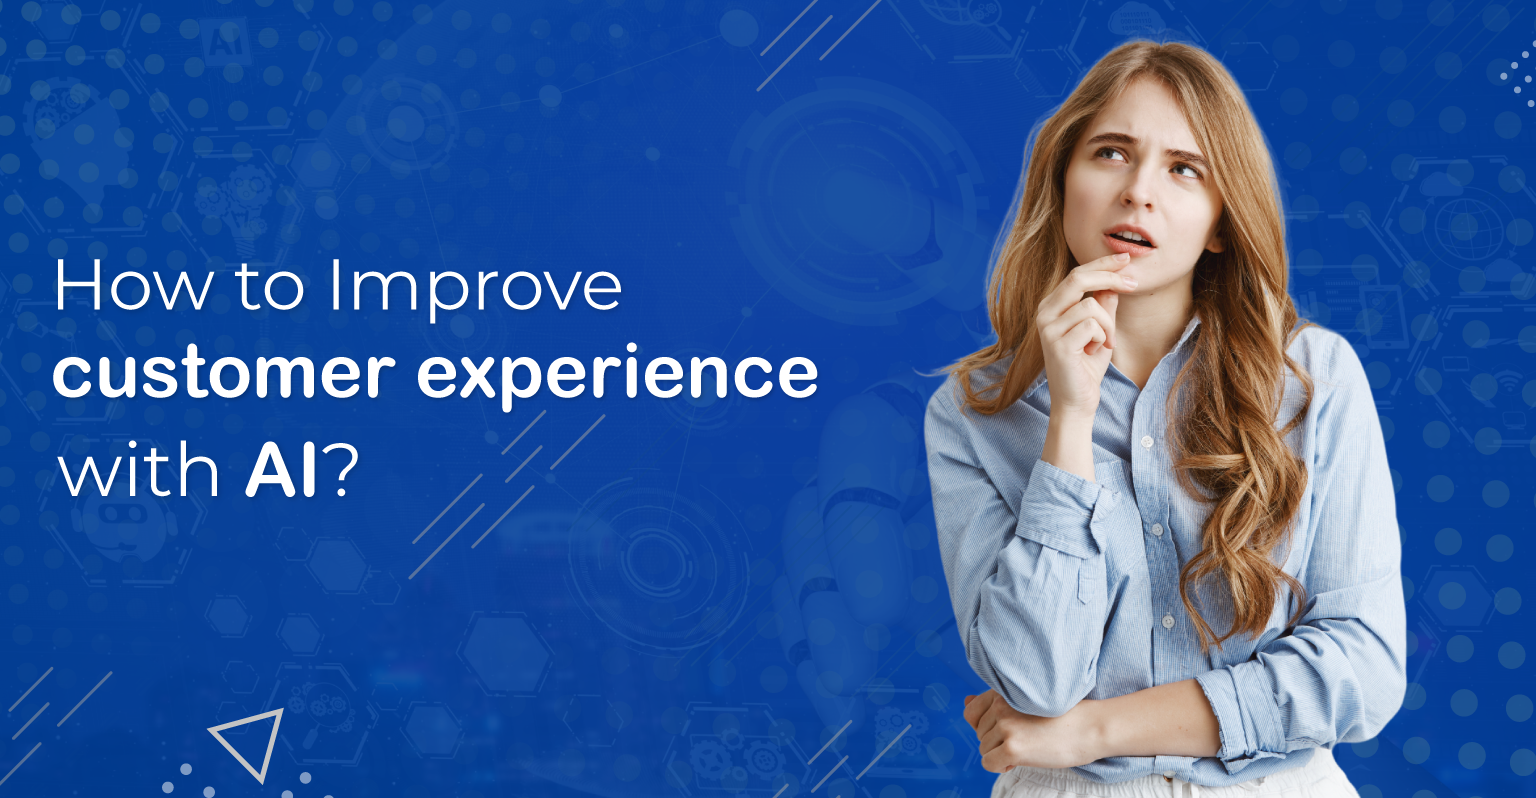 How to Improve customer experience with artificial intelligence?